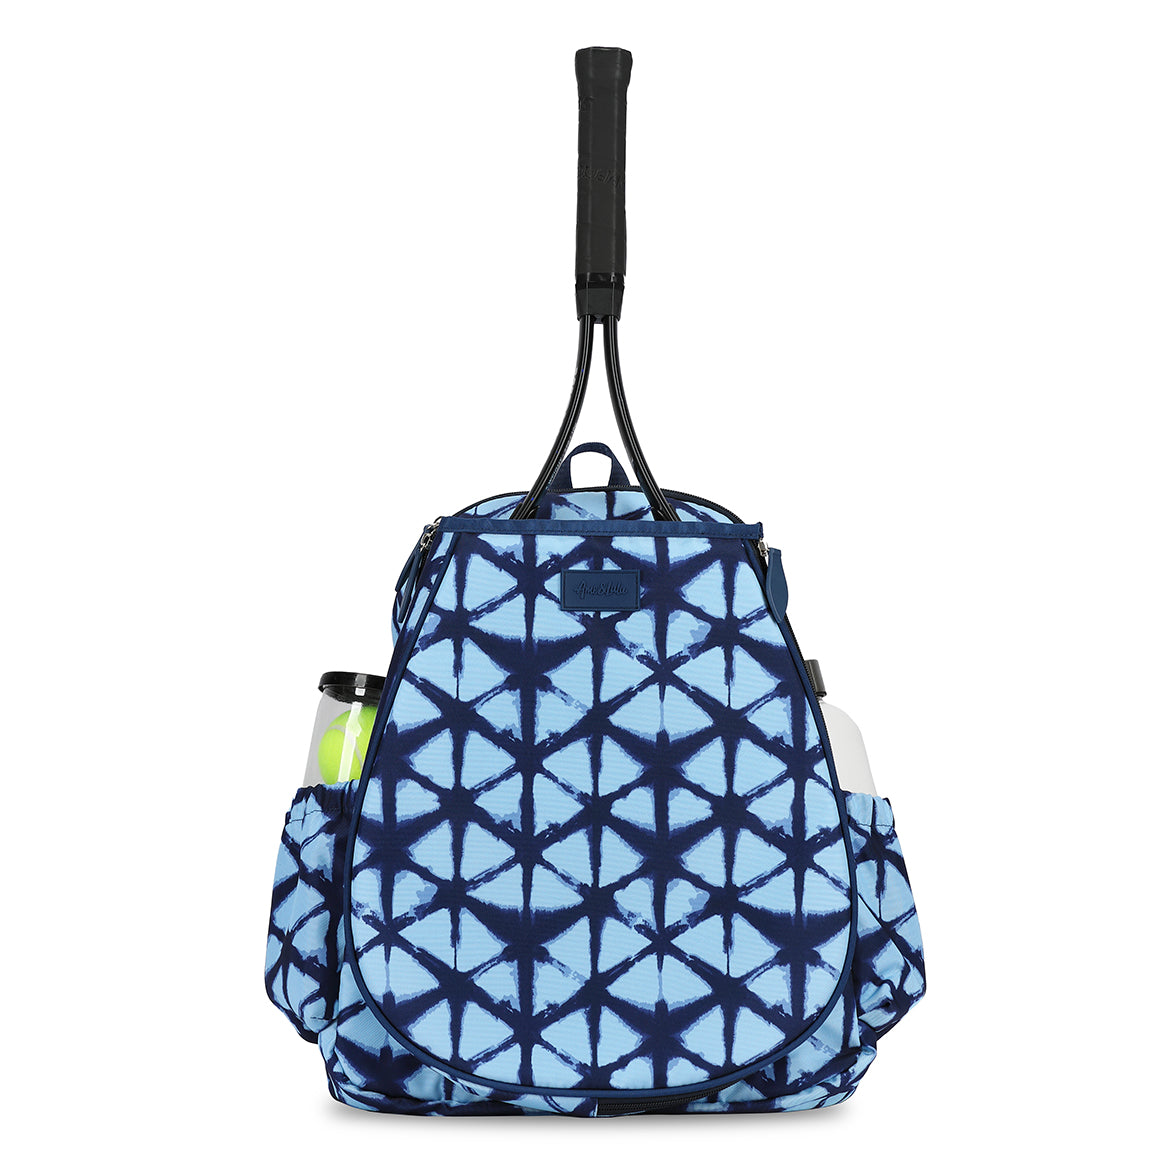 Front view on navy and blue shibori tie dye pattern tennis backpack.